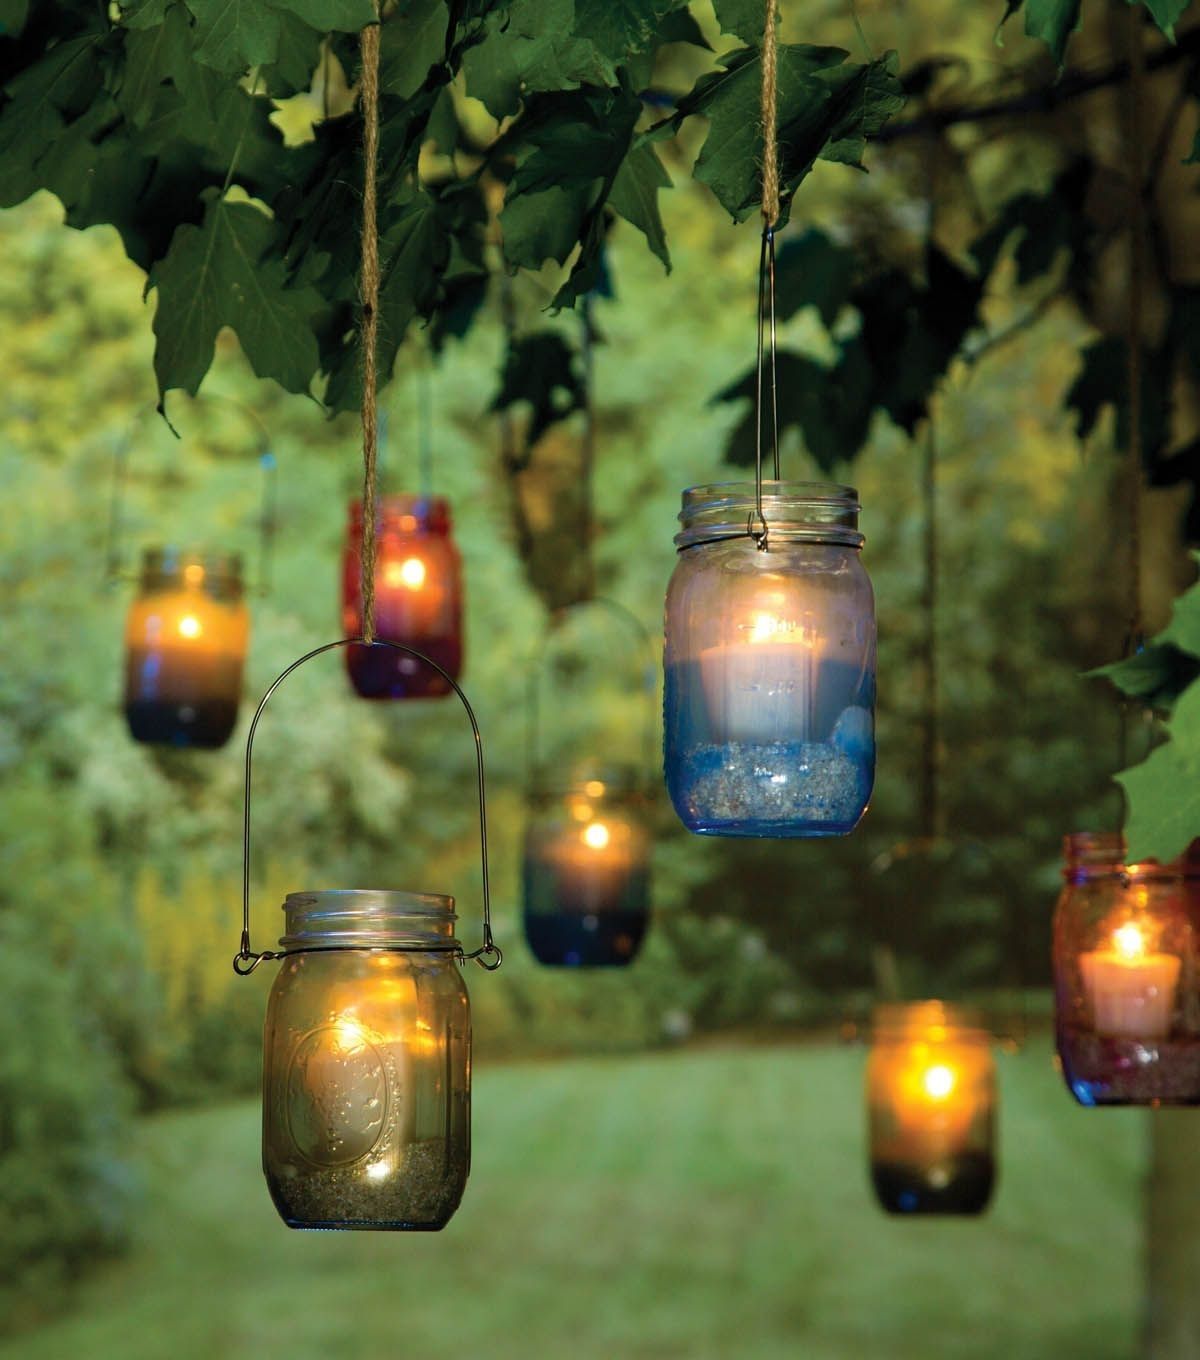 How To Make Colorful Jar Lanterns | Diy Outdoor Decor | Gardens For Joanns Outdoor Lanterns (View 20 of 20)